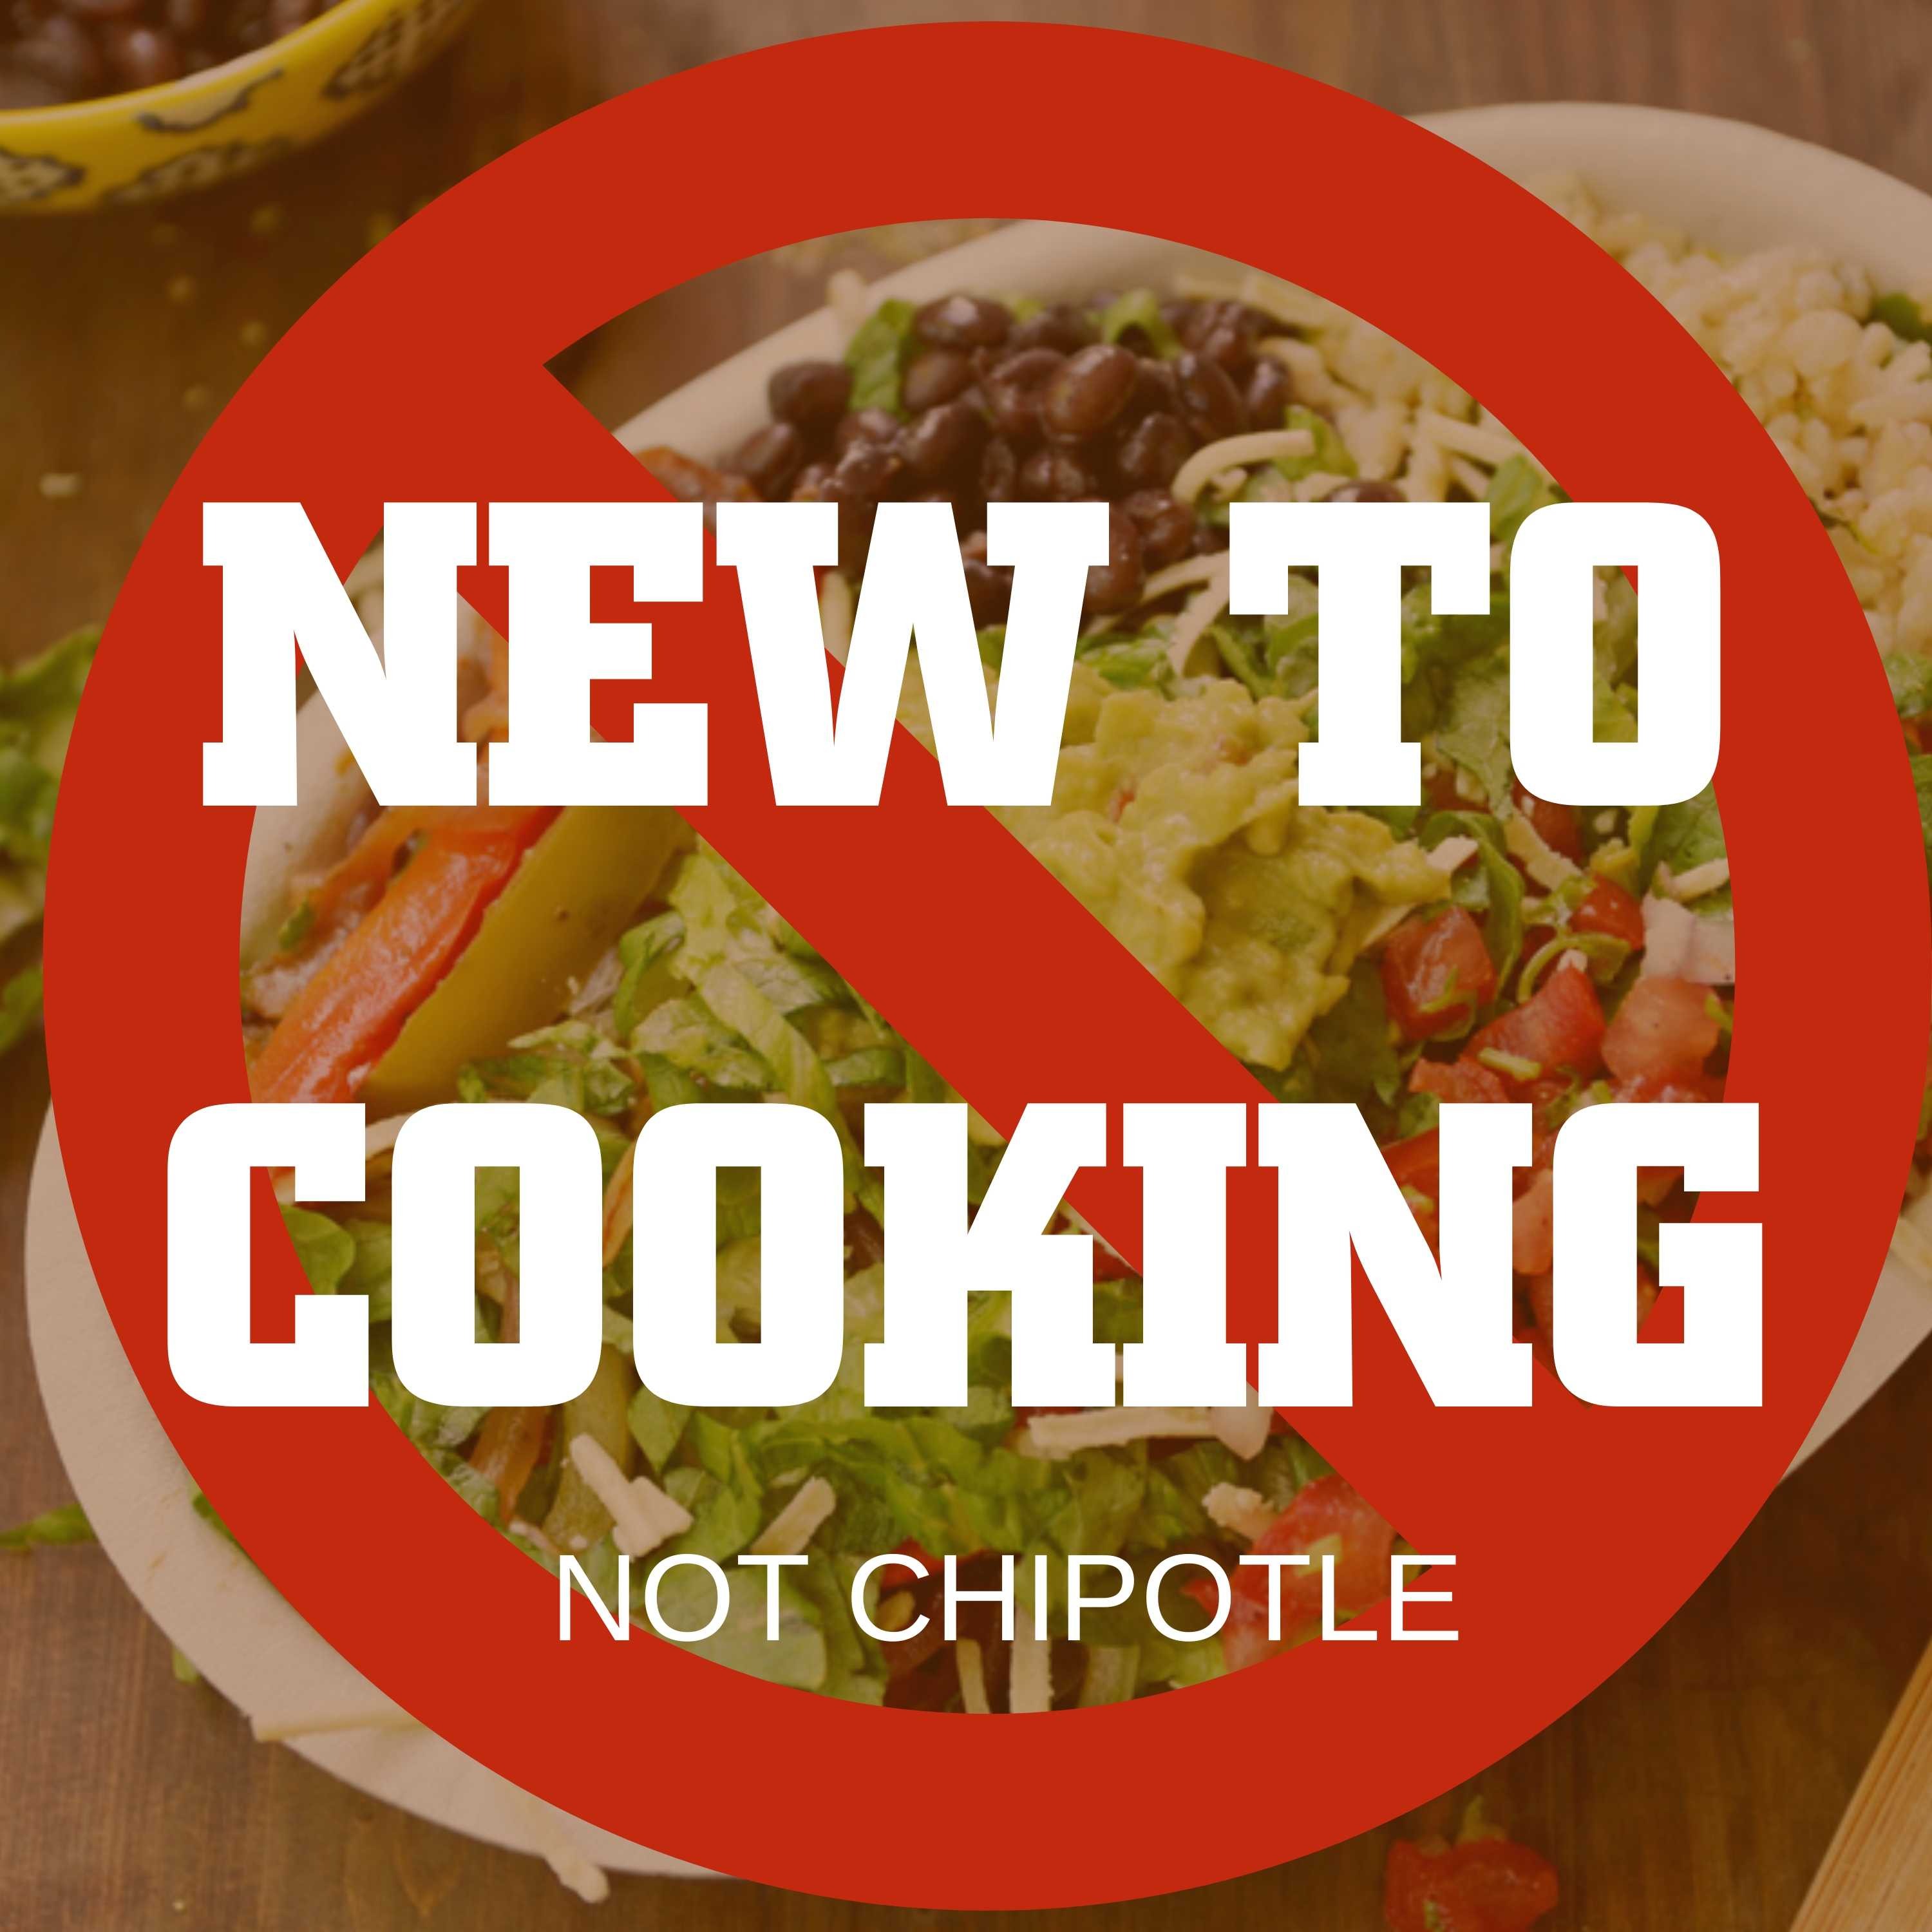 NOT Chipotle